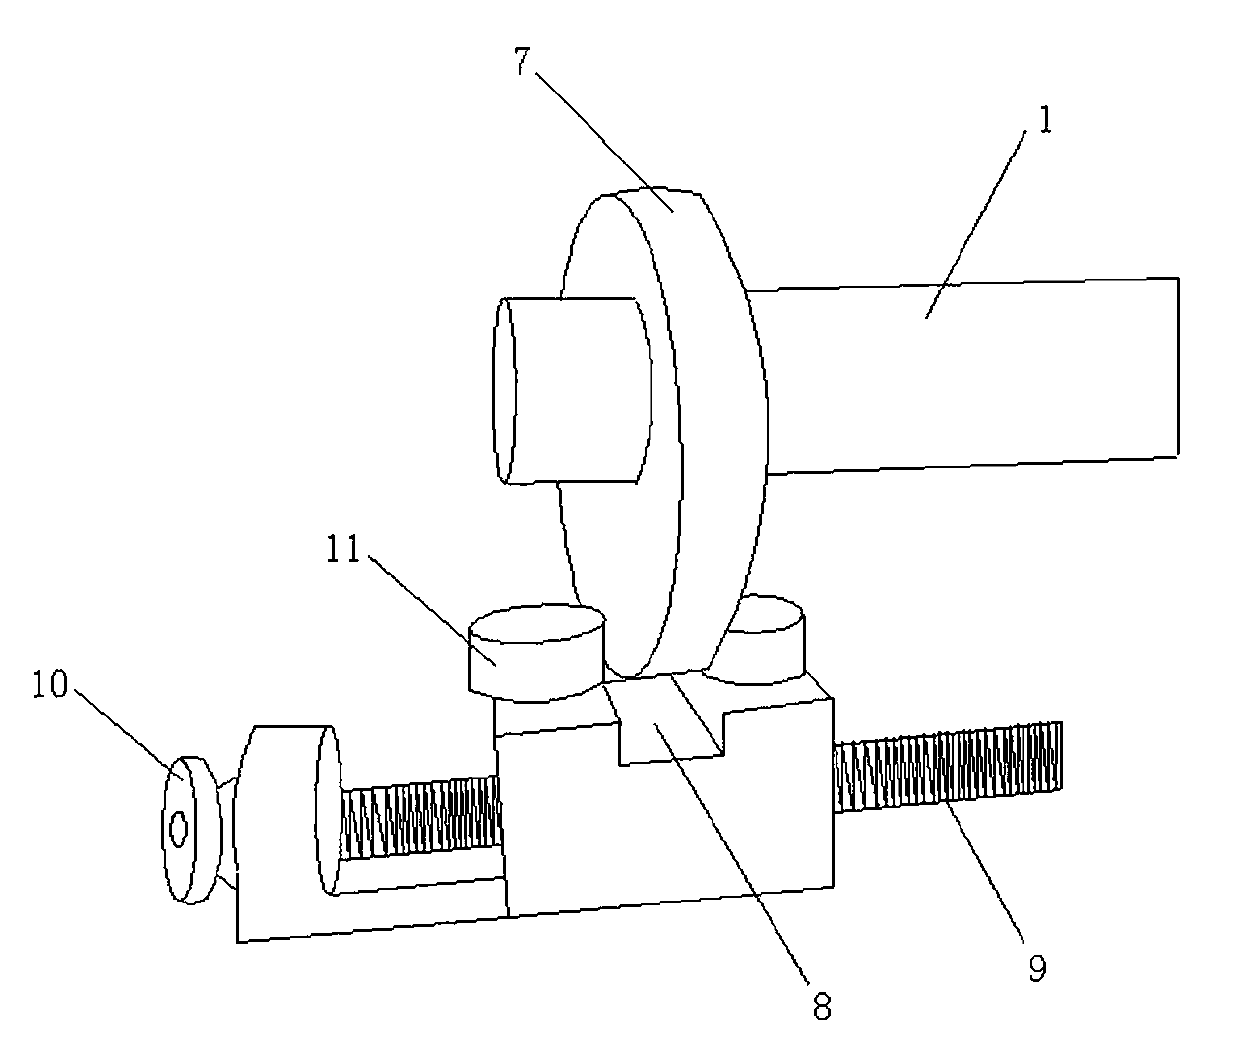 Paper transmitting device suitable for splitting machine